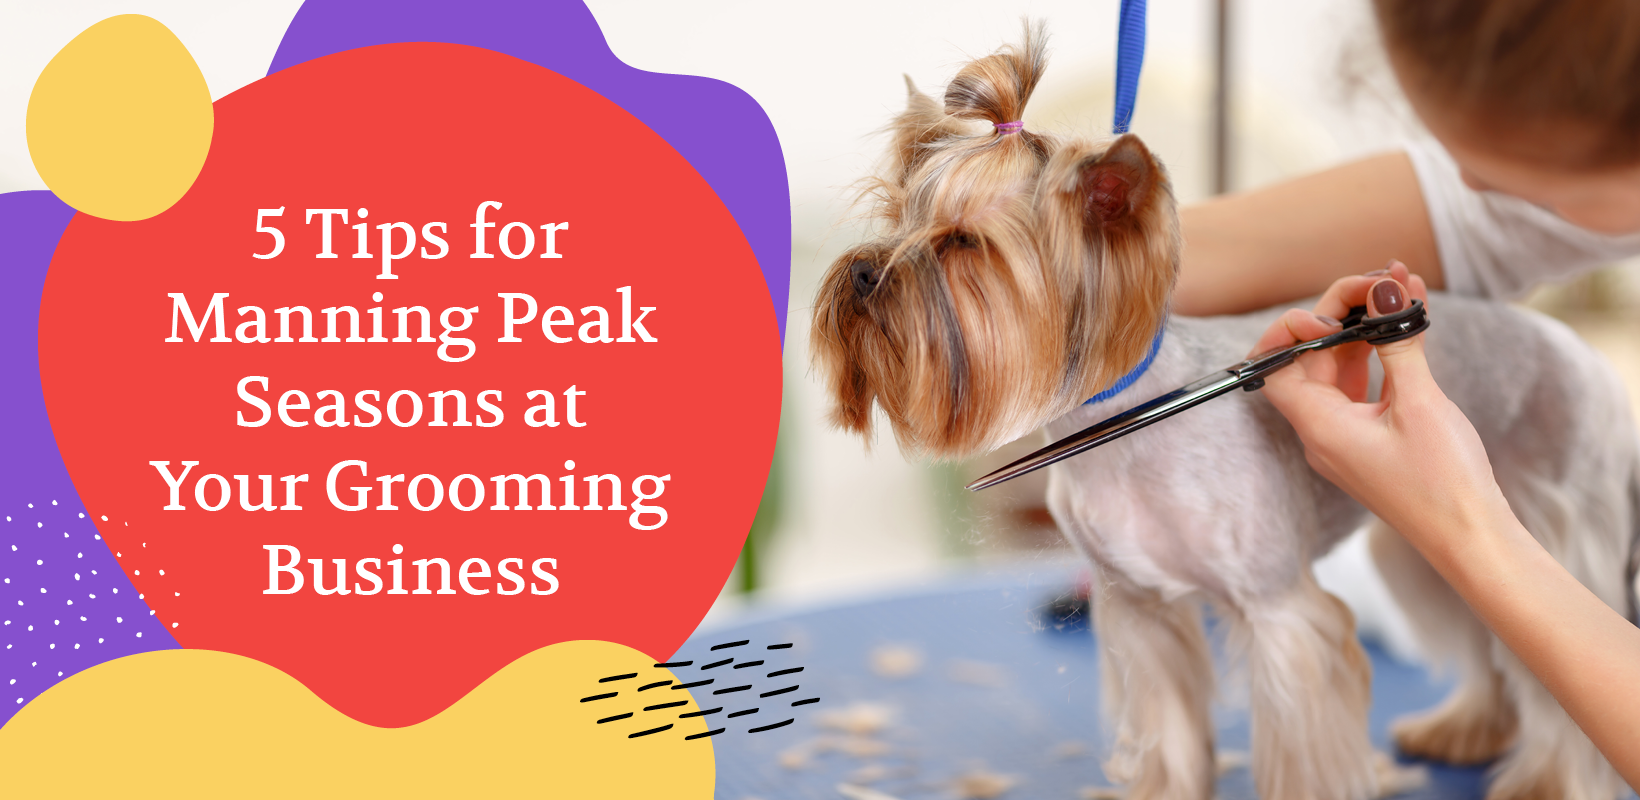 Learn how to manage peak seasons at your grooming business.